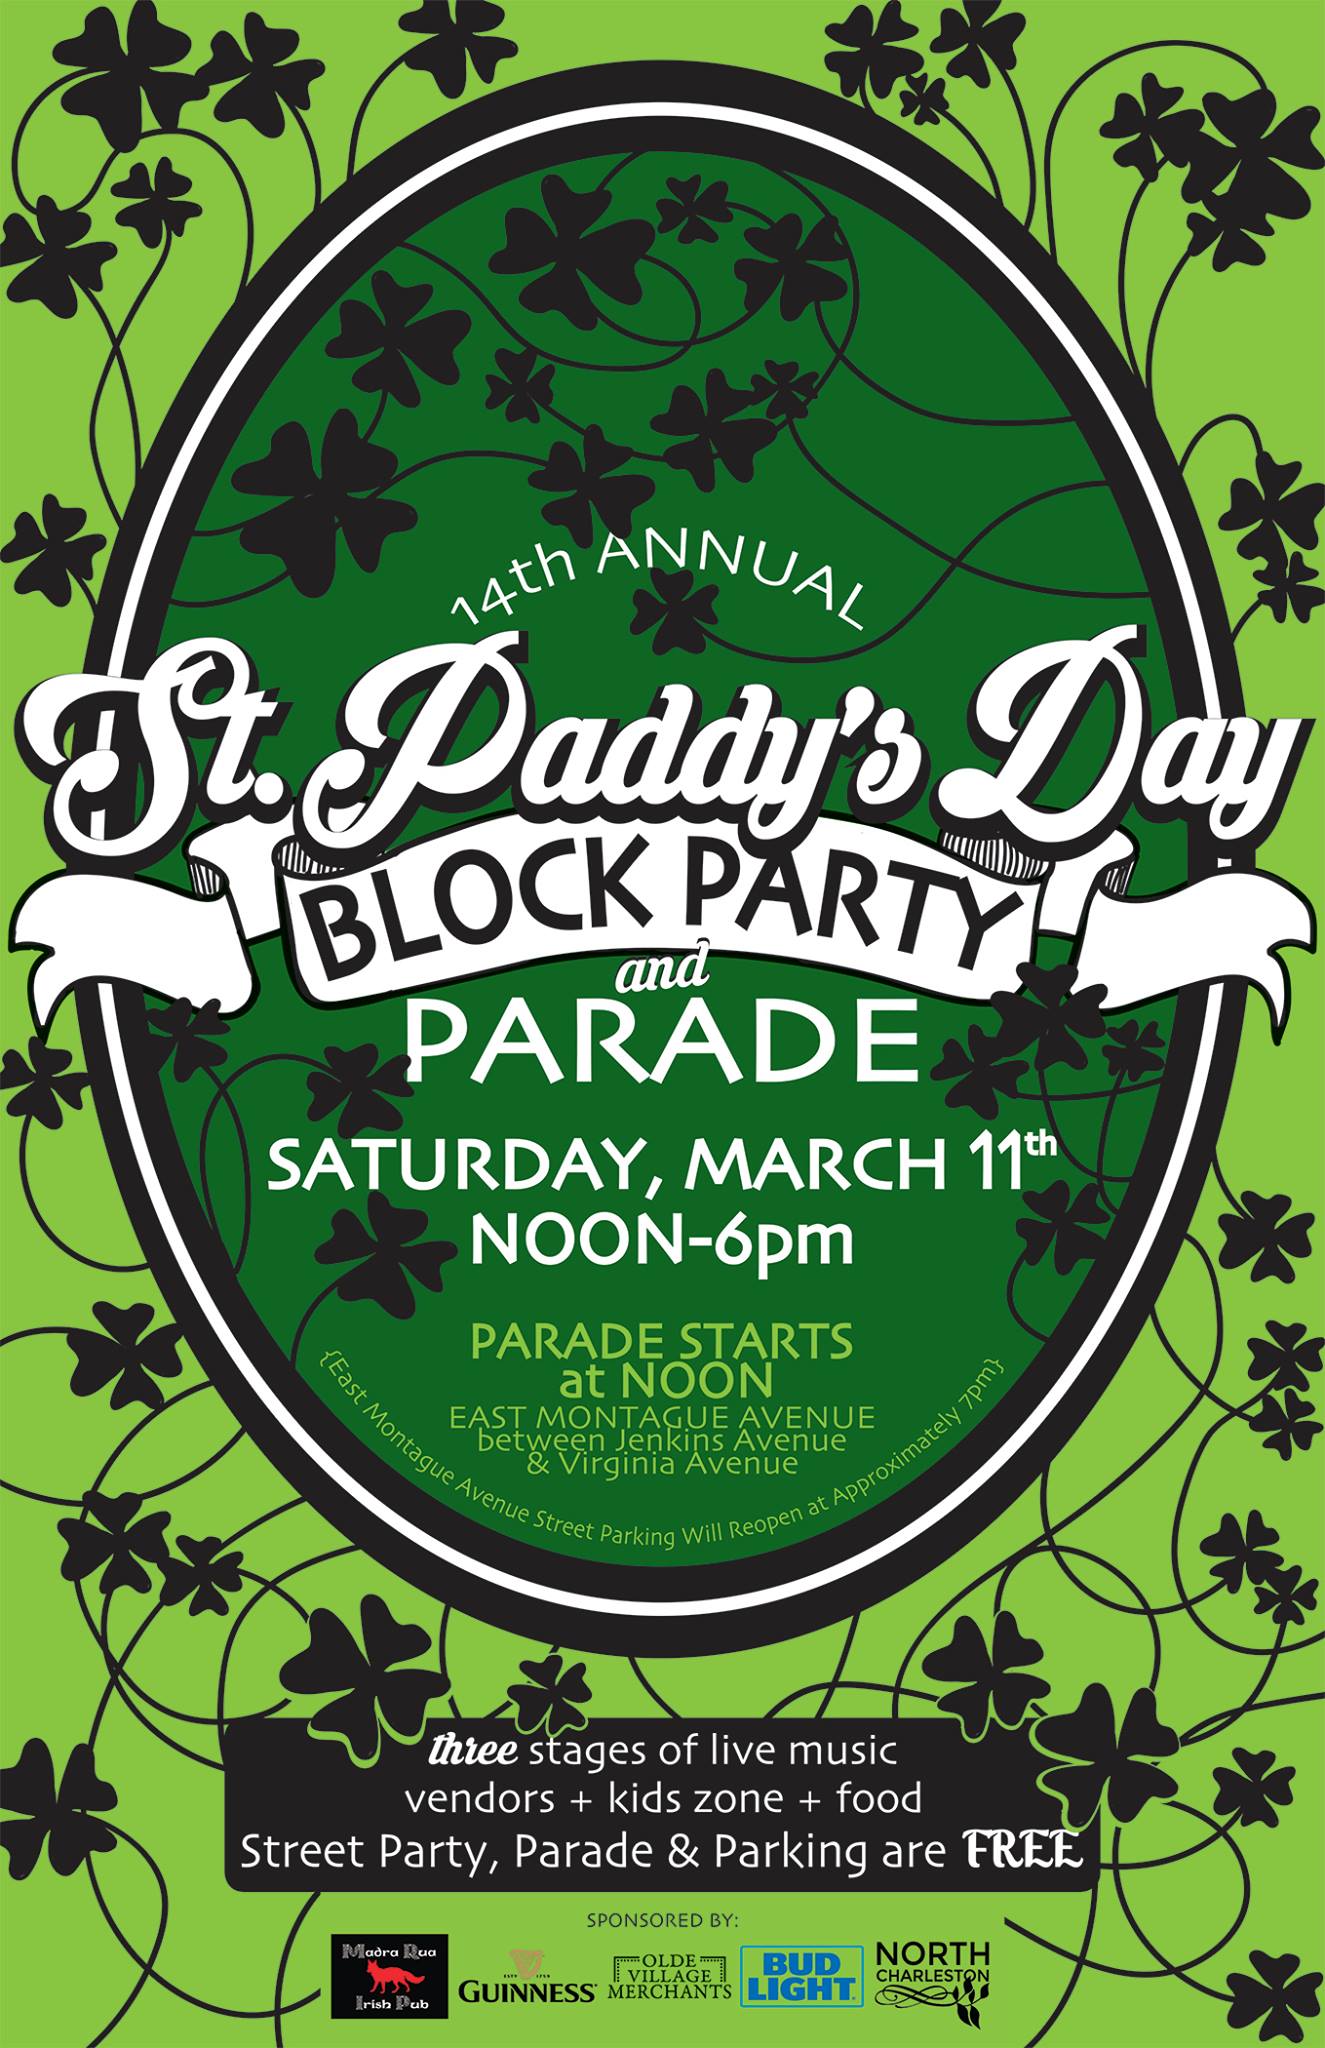 14th Annual St. Paddy's Day Block Party and Parade - Park Circle